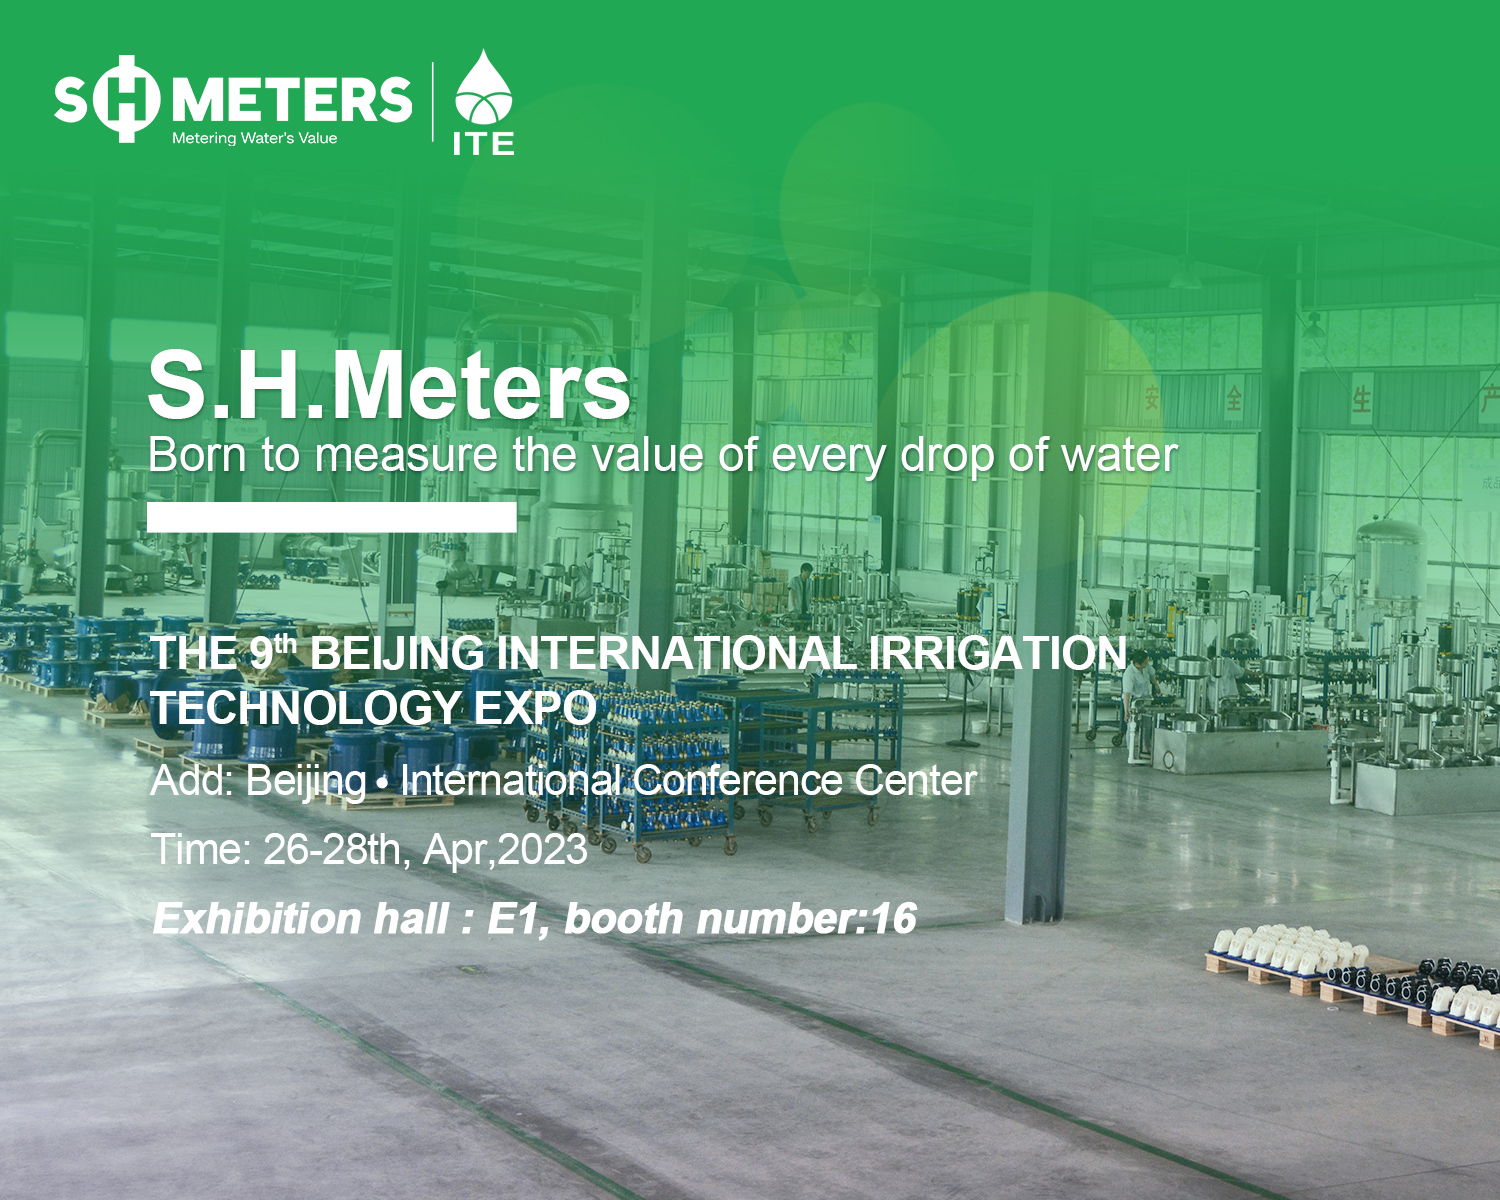 Revolutionize Your Farming Operations - Explore Irrigation Solutions from S.H. Meters in Beijing